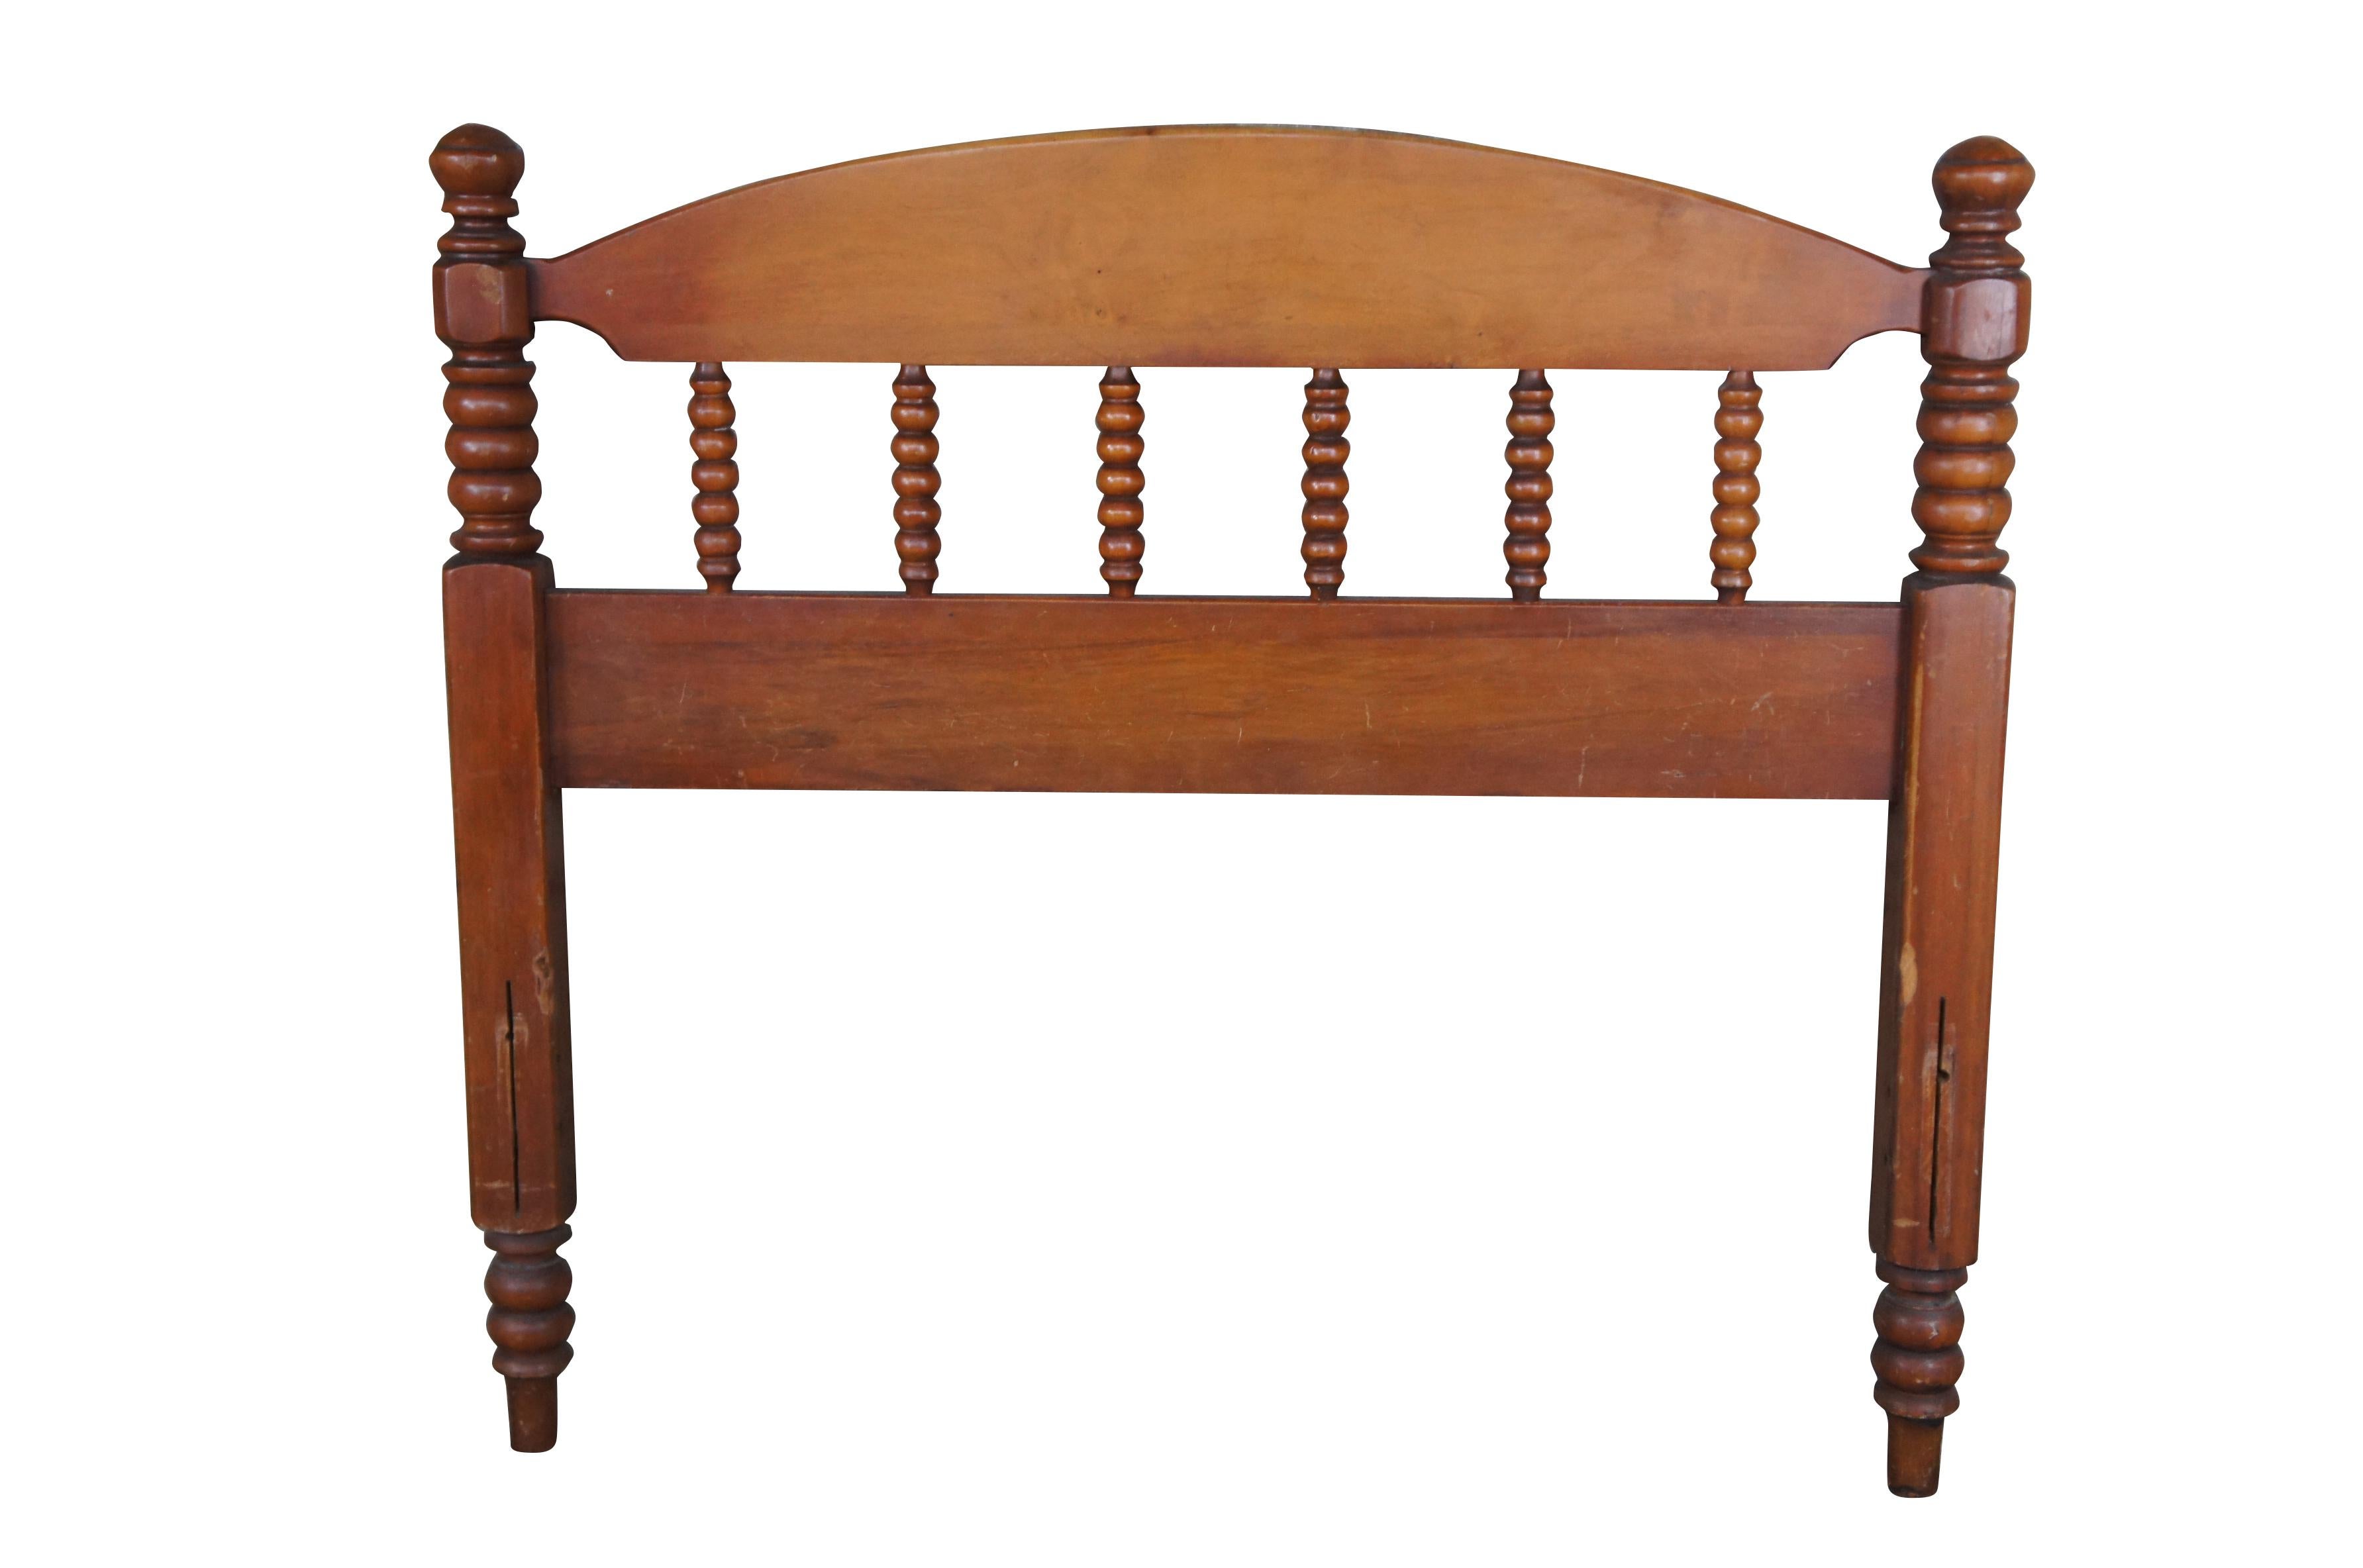 Pair of Early American style twin size headboards.  Made from maple with a crescent shaped back with ribbed spindles and turned posts.

Dimensions:
38